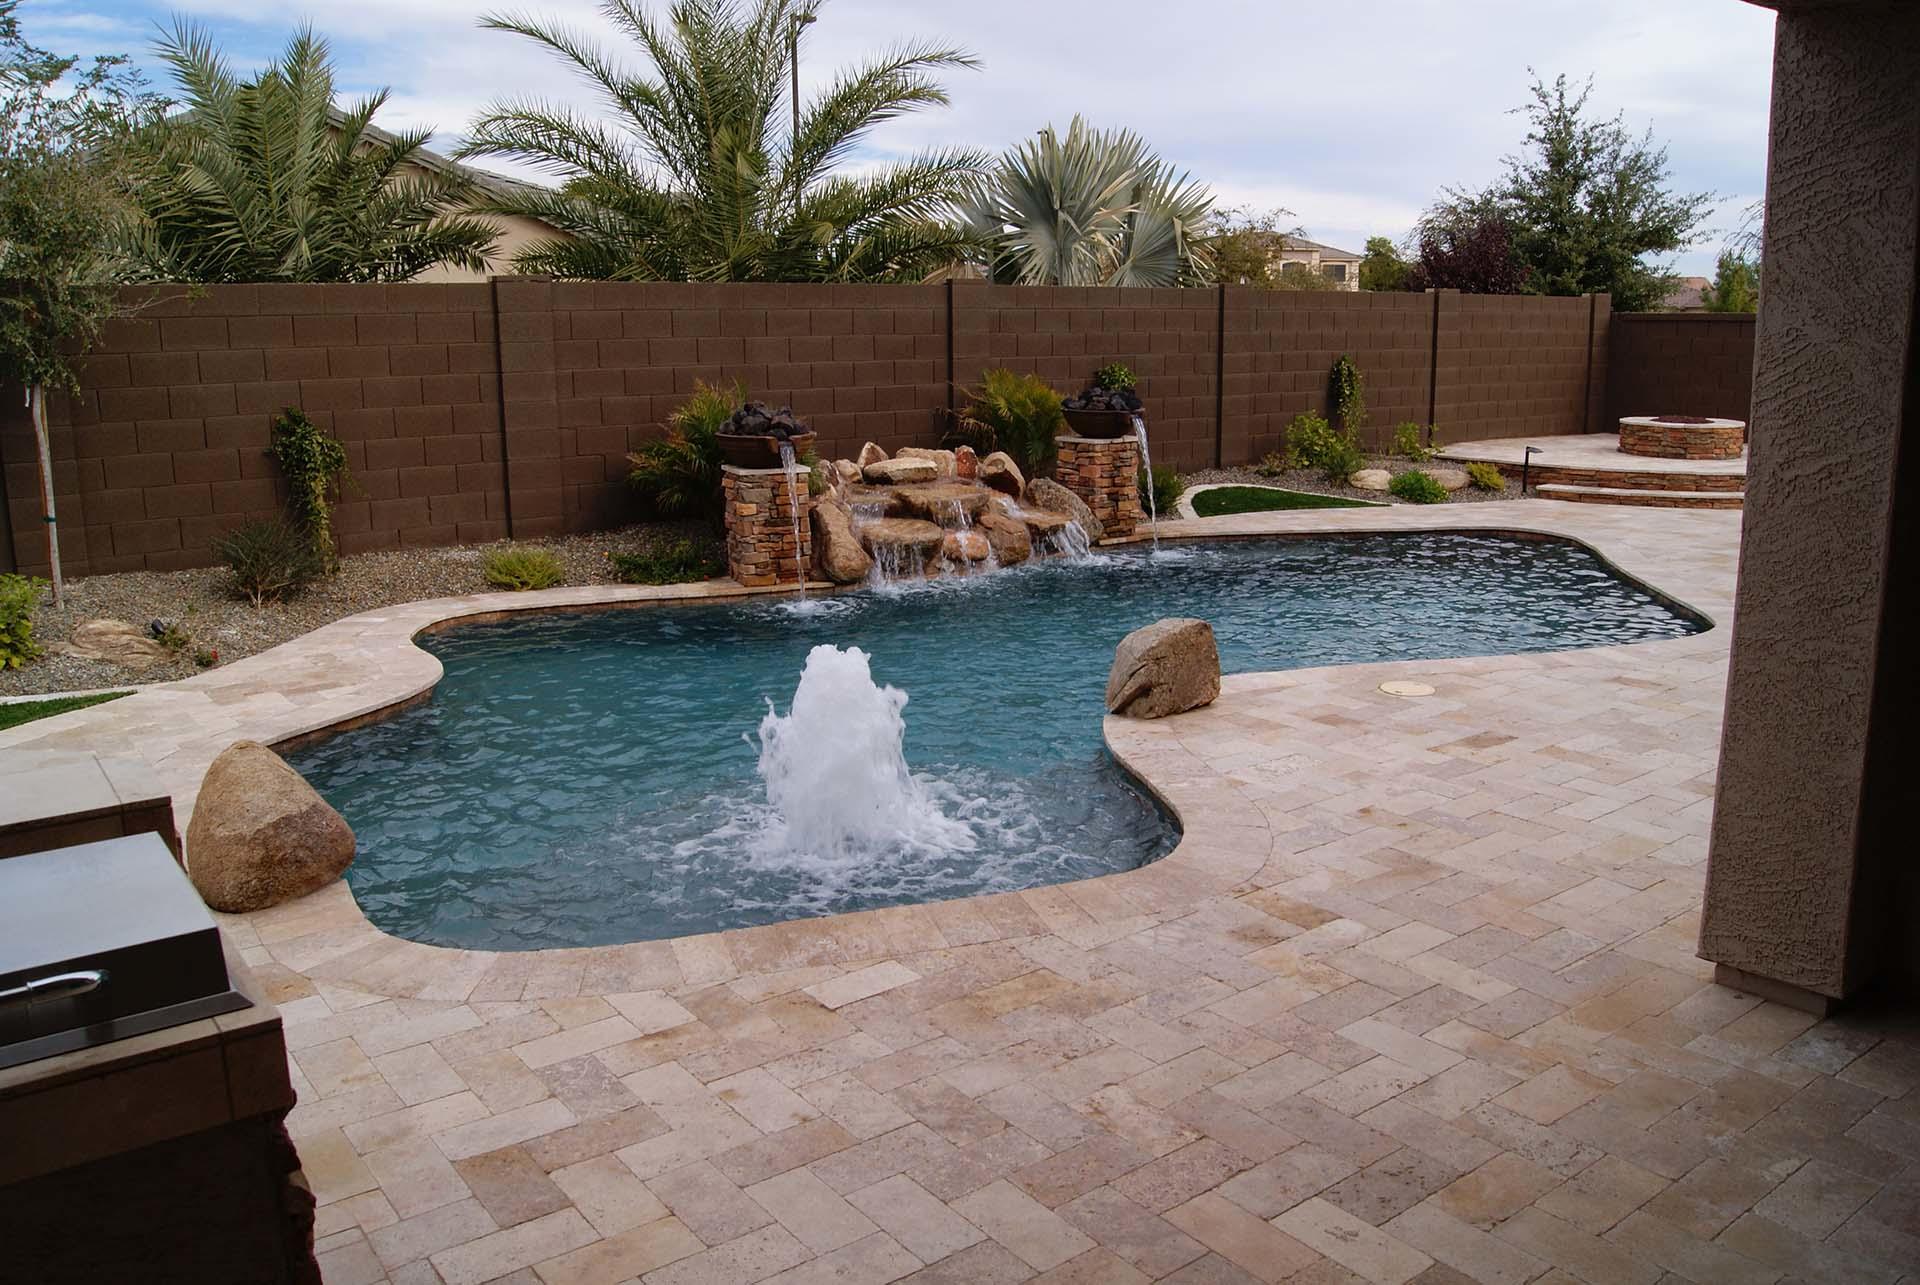 No Limit Pools Other Projects - Water Fountain No Limit Pools & Spas Mesa (602)421-9379